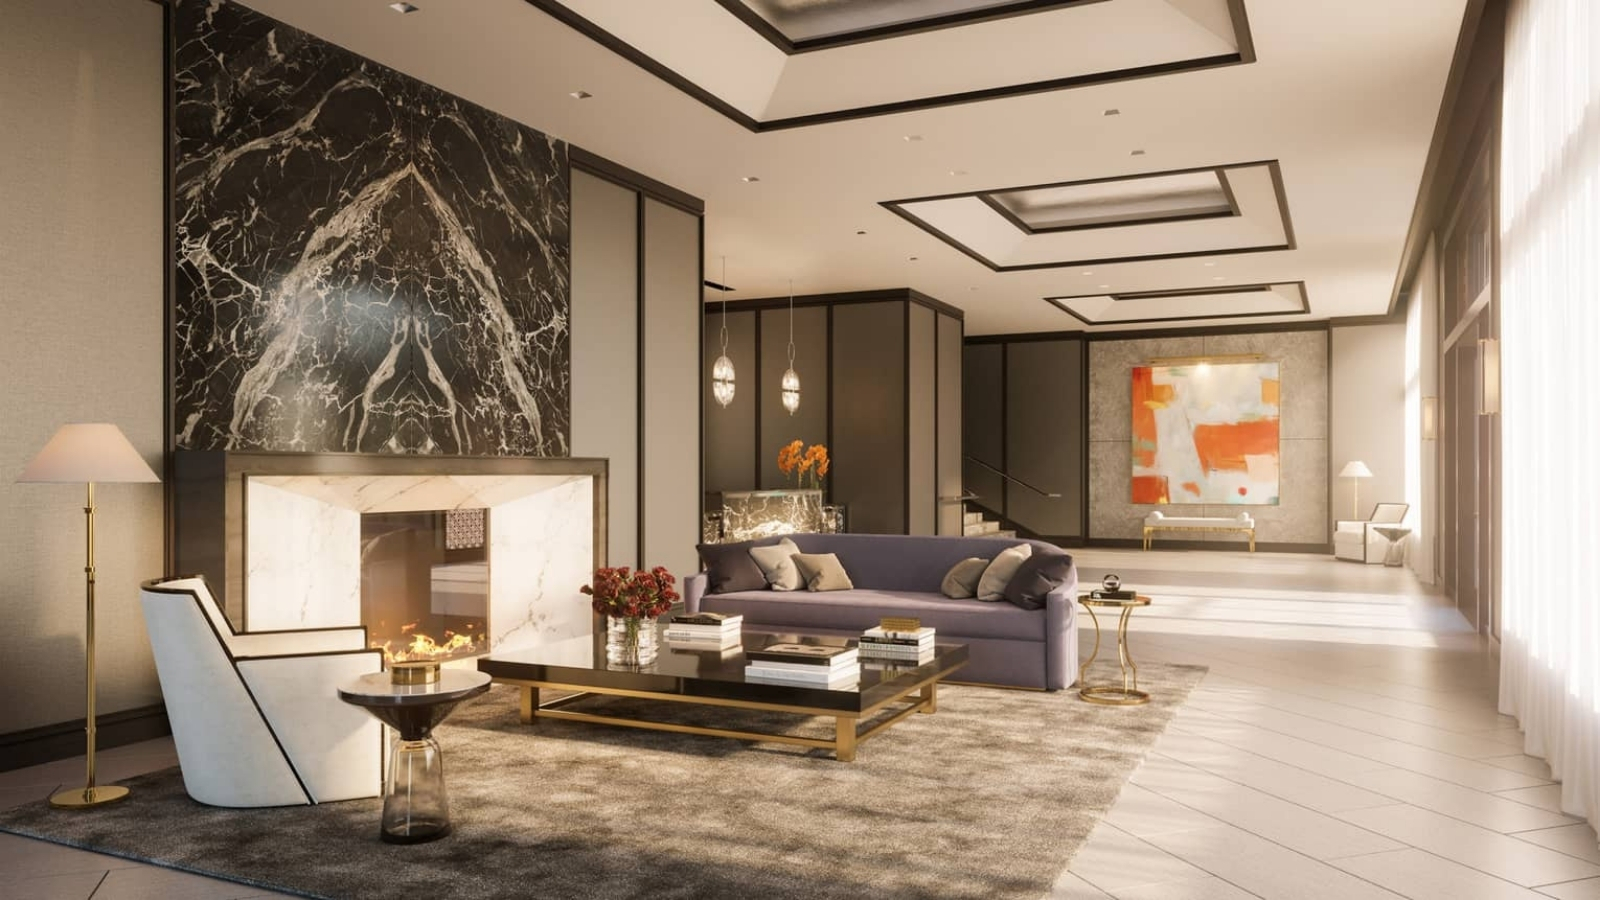 Luxury interior design of Four Seasons Private Residences project, San Francisco